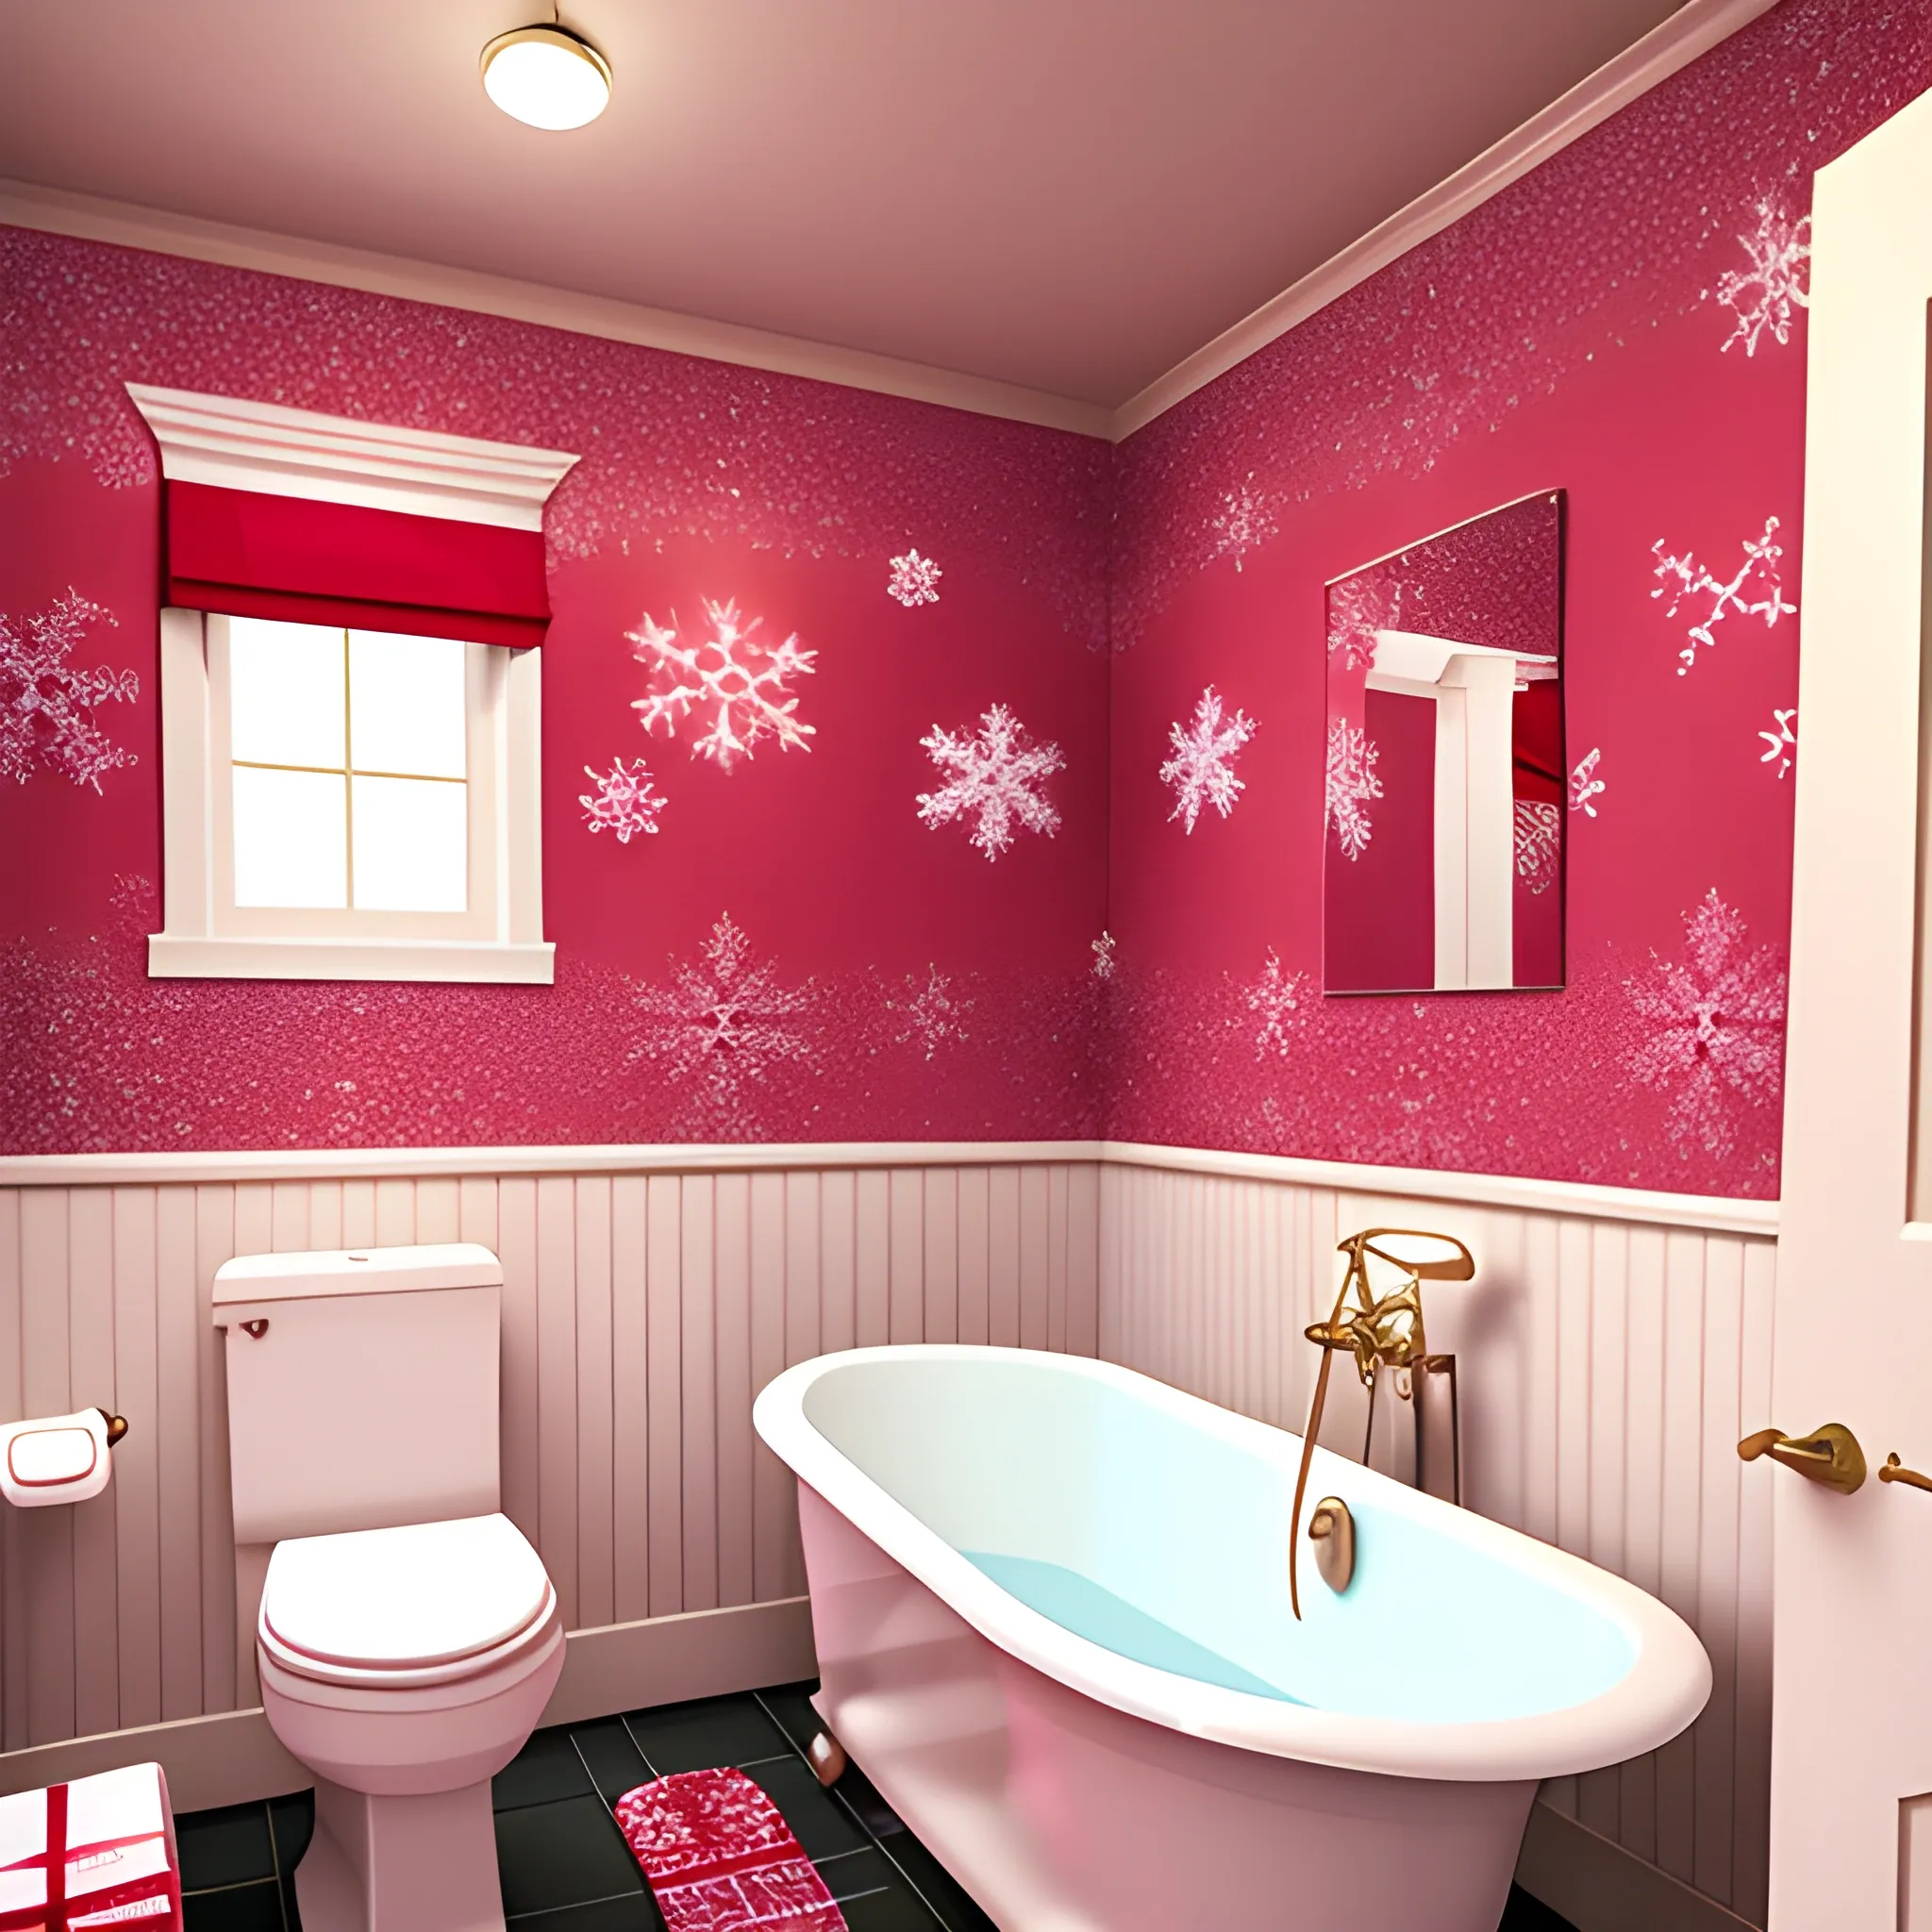 Liminal space tilted pink bathroom with christmas decorations